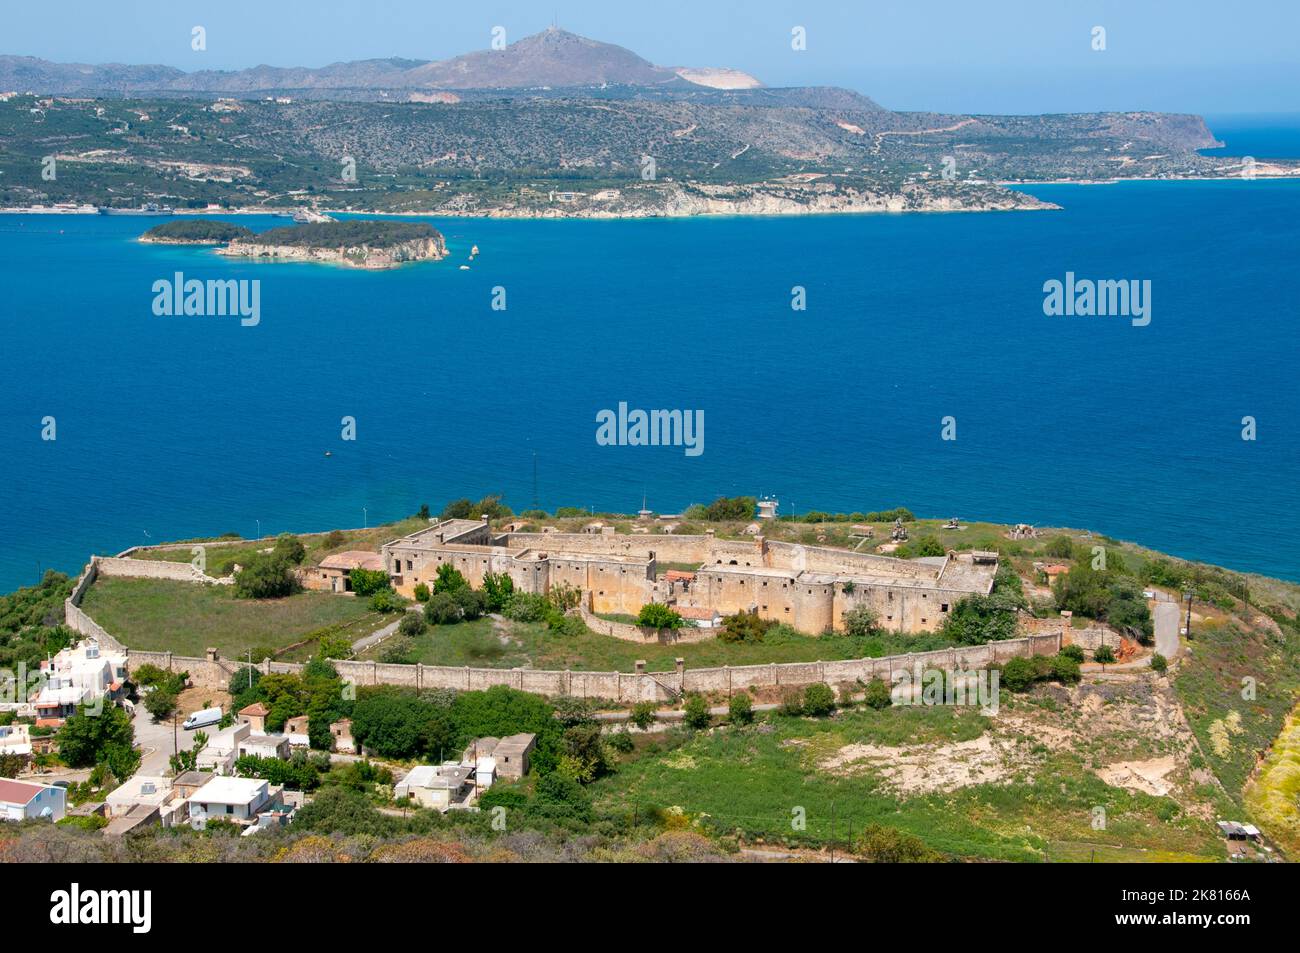 Greece: The 19th century Ottoman Izzeddin Fortress, Souda Bay, Crete. The fortress was constructed in 1872 by the Ottoman governor of Crete, Rauf Pasha. It is best known for its role as a prison for political prisoners in 20th-century Greece. The last official execution in Greece took place here in 1972. Stock Photo